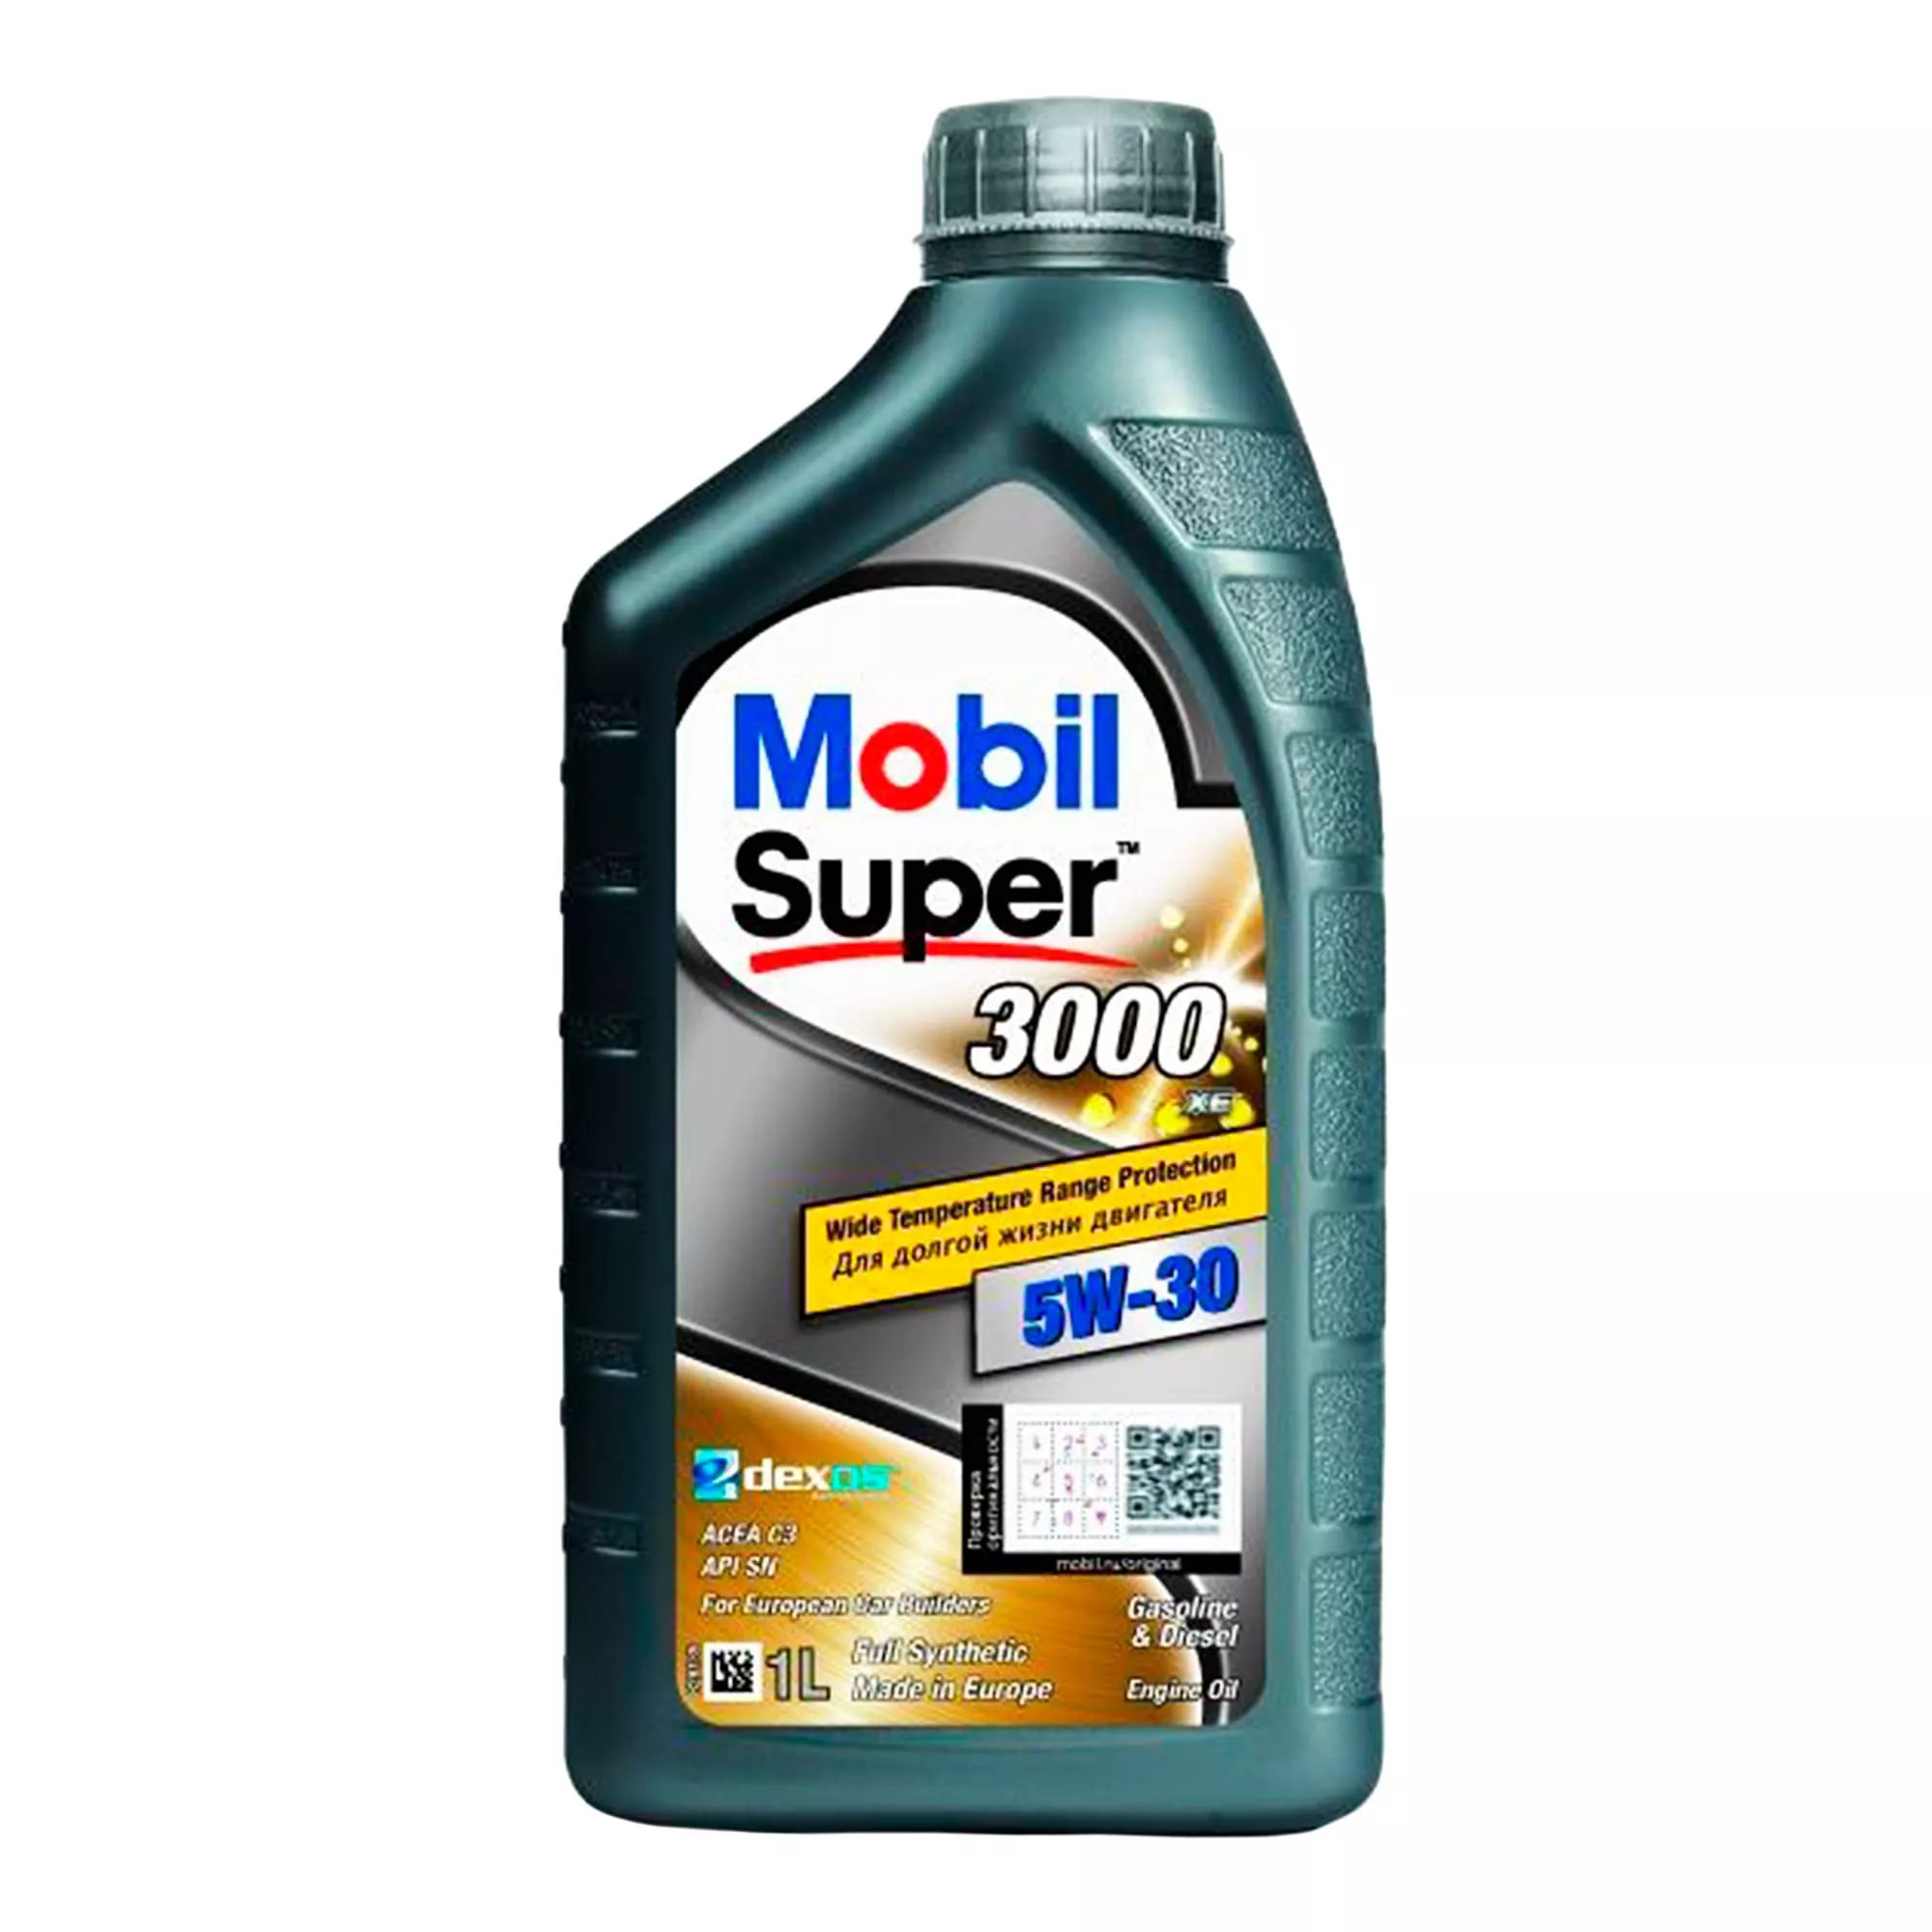 Моторное масло Mobil Super 3000 XE 5W-30 1л (151456)